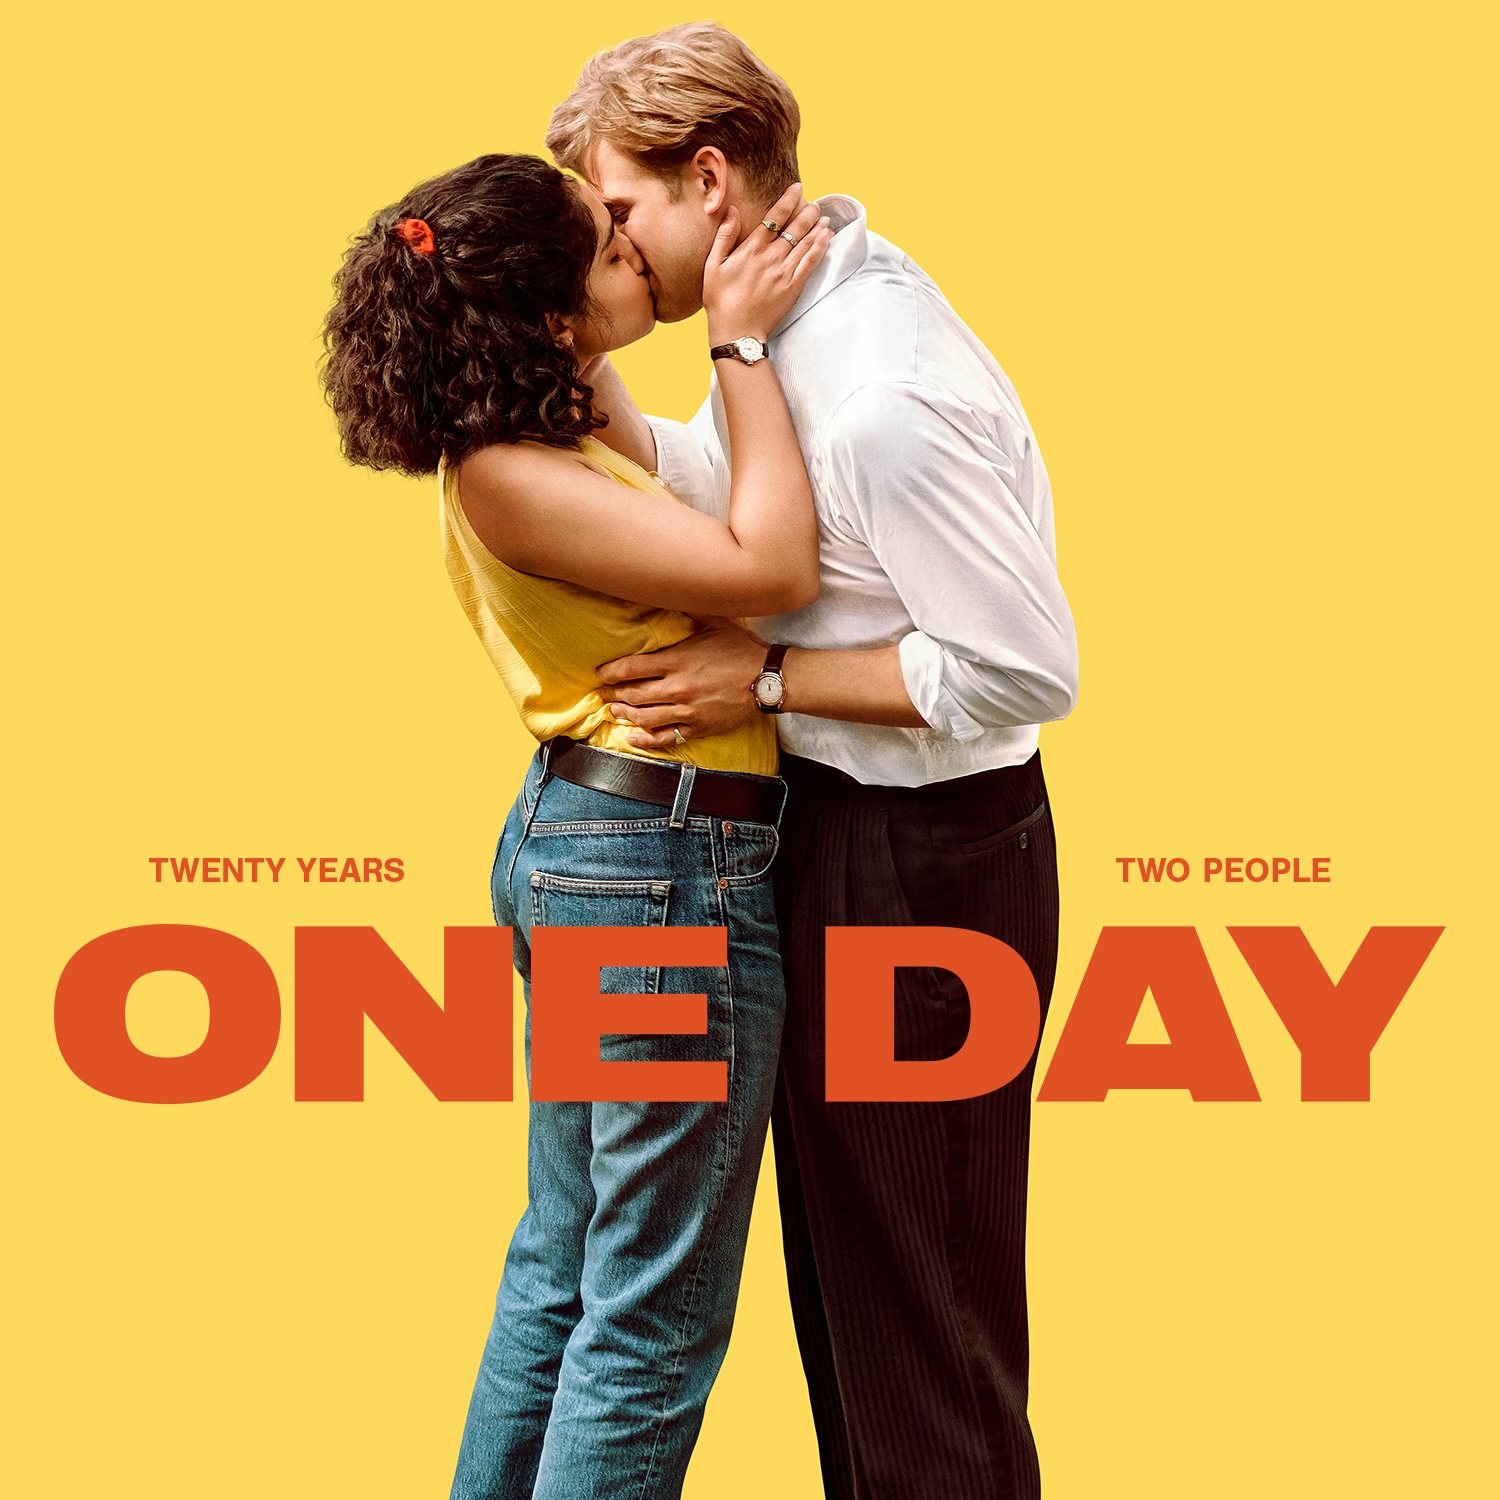 Netflix Releases 'One Day' Air Edel